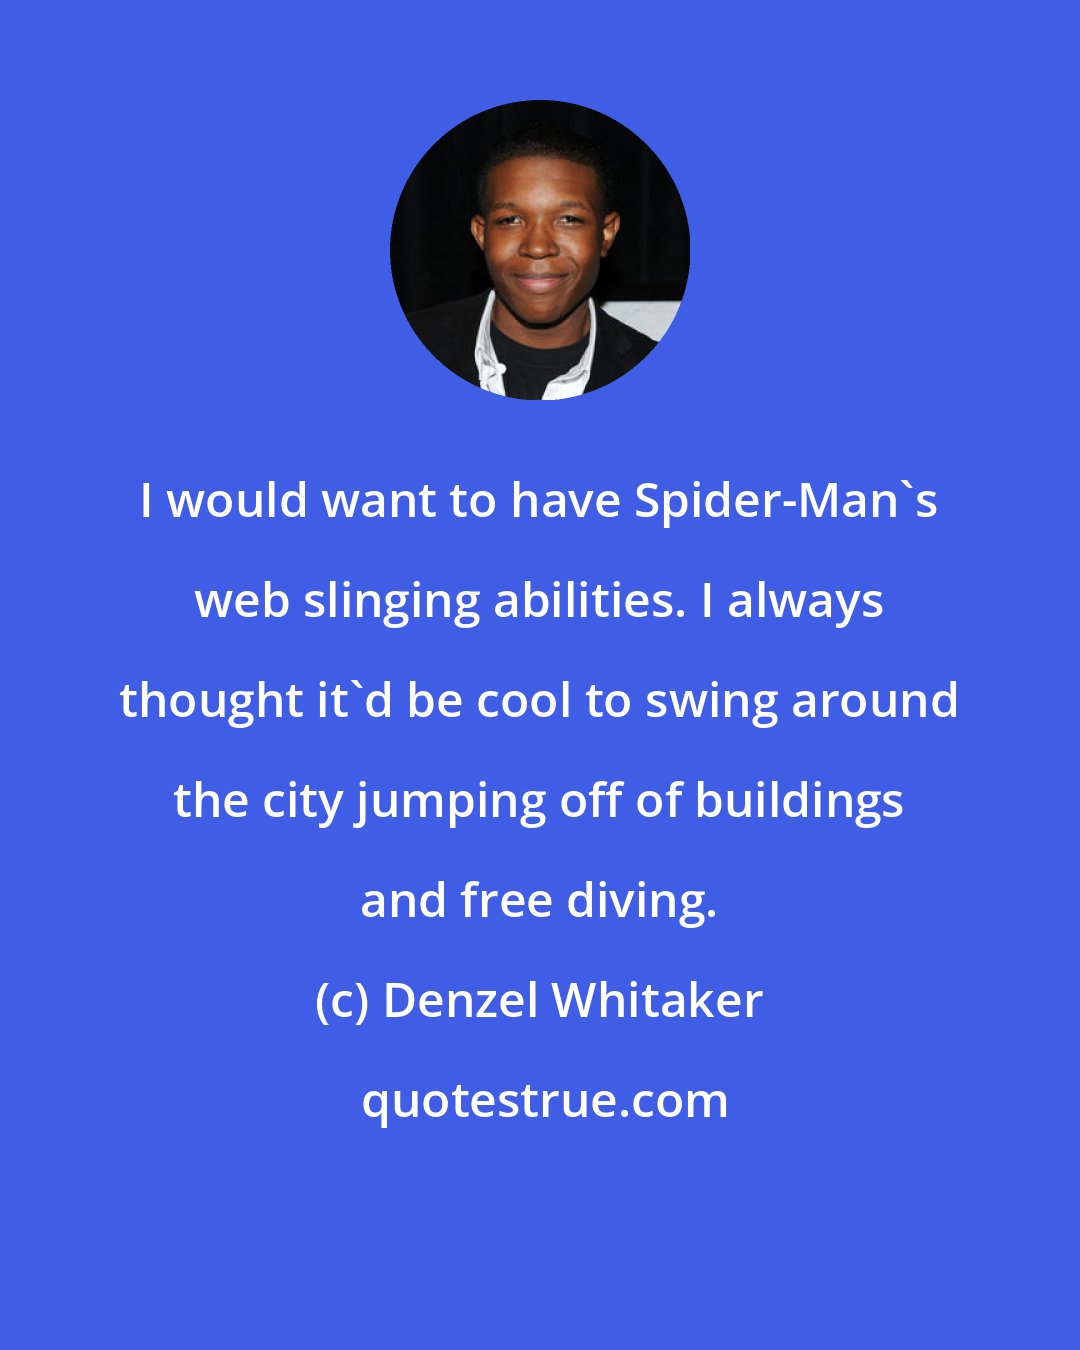 Denzel Whitaker: I would want to have Spider-Man's web slinging abilities. I always thought it'd be cool to swing around the city jumping off of buildings and free diving.